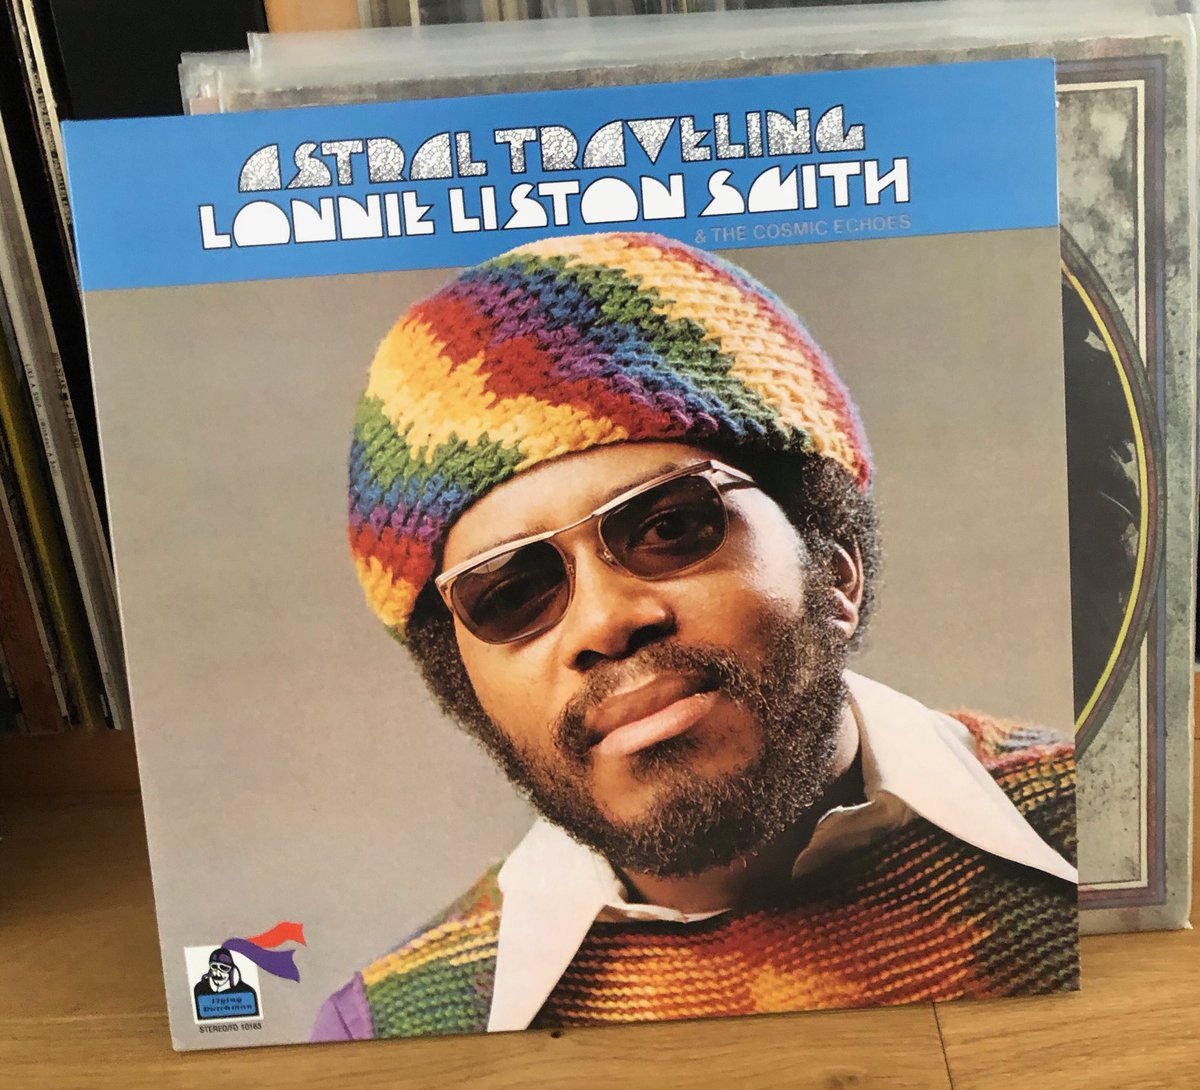 #NowPlaying #lonnielistonsmith